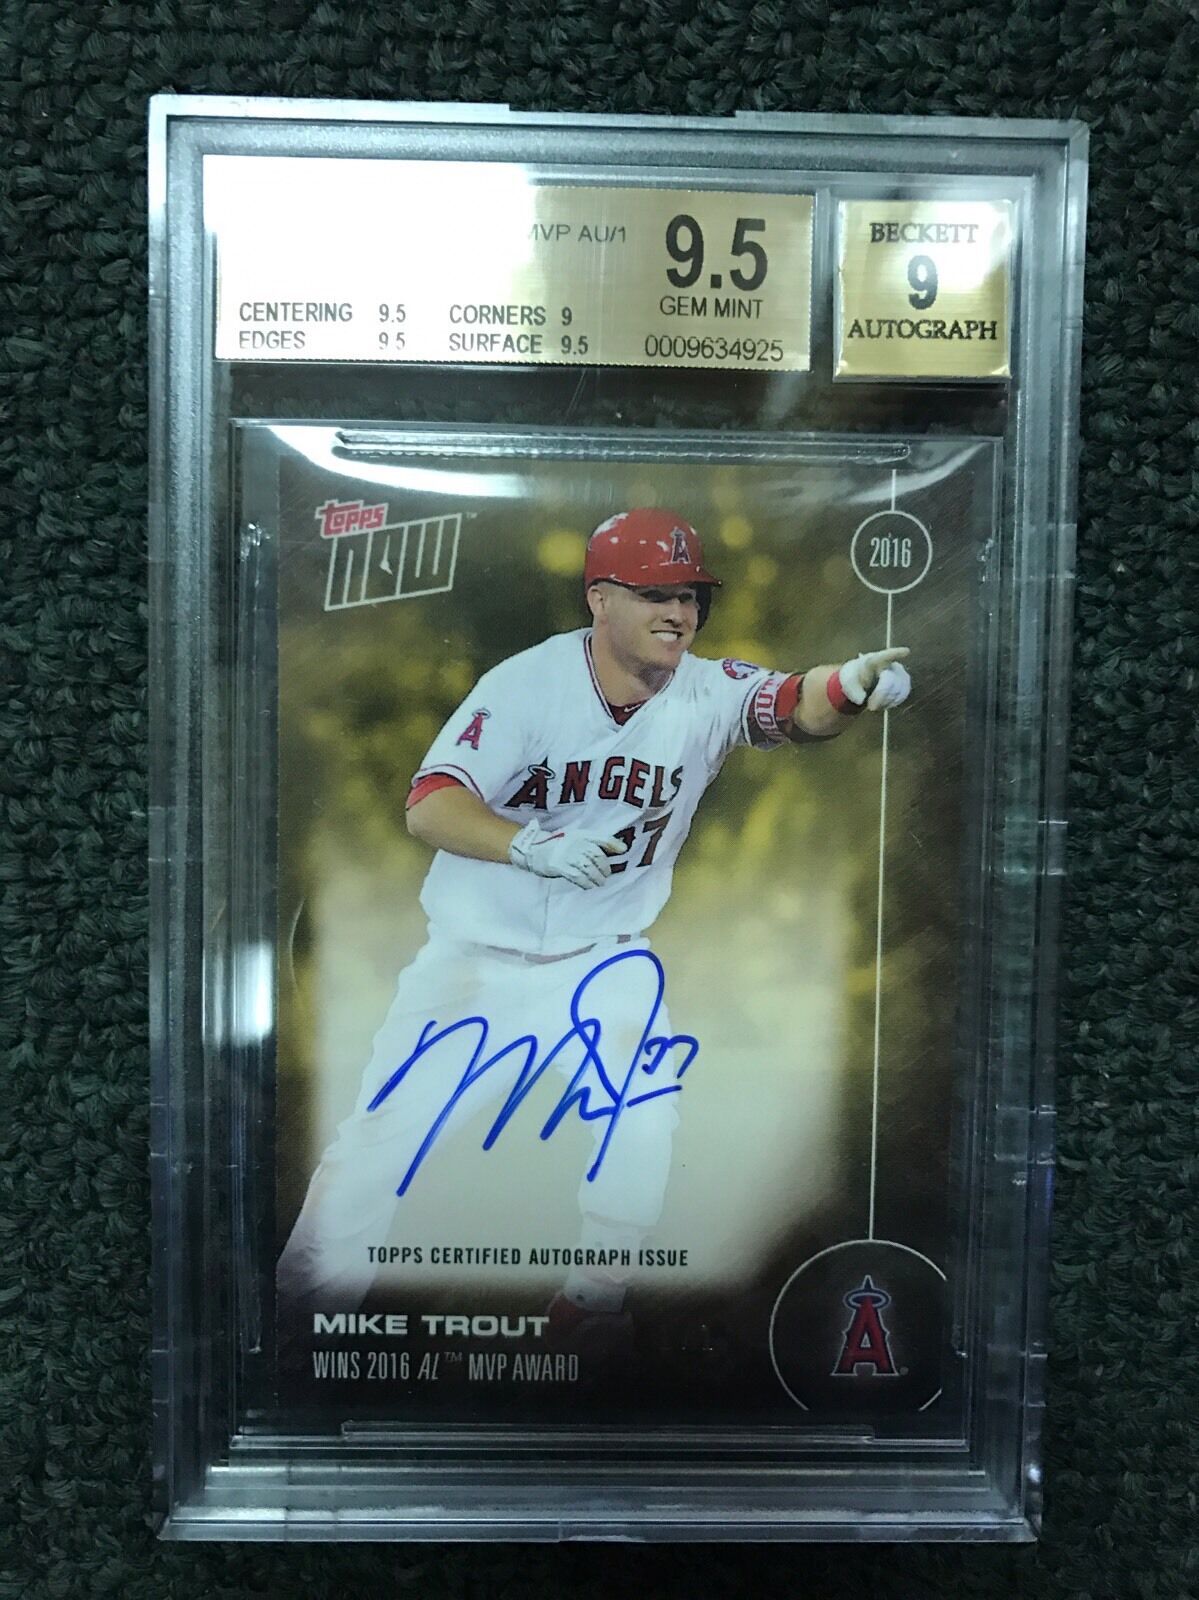 TOPPS NOW Auto on CARD MIKE TROUT WINS THE AMERICAN LEAGUE MVP AWARD BGS 9.5 1/1